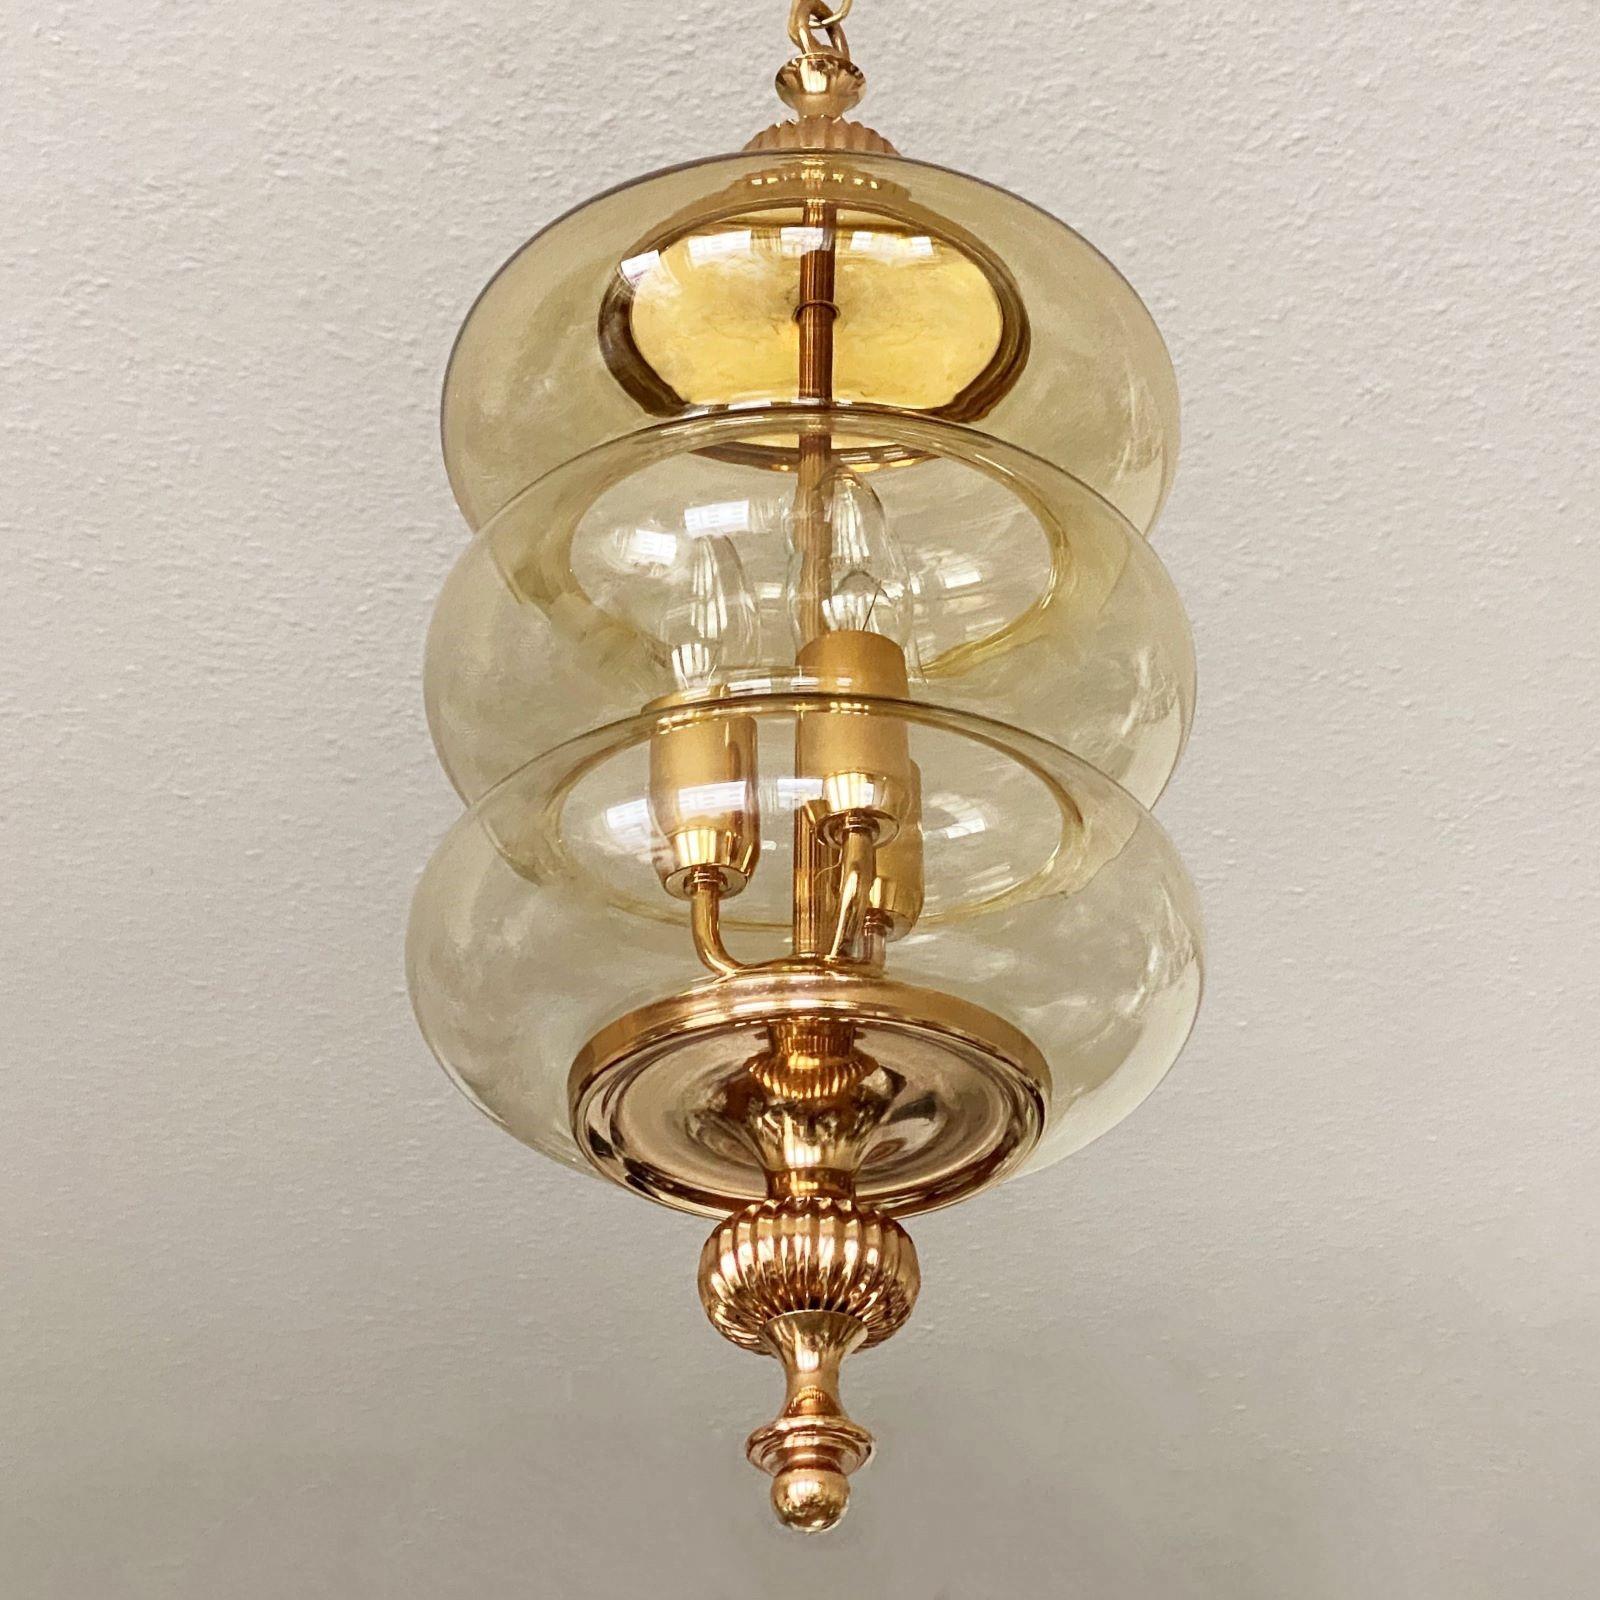 Fontana Arte Style Blown Glass Brass Thee-Light Lantern or Pendant, Italy, 1950s For Sale 1